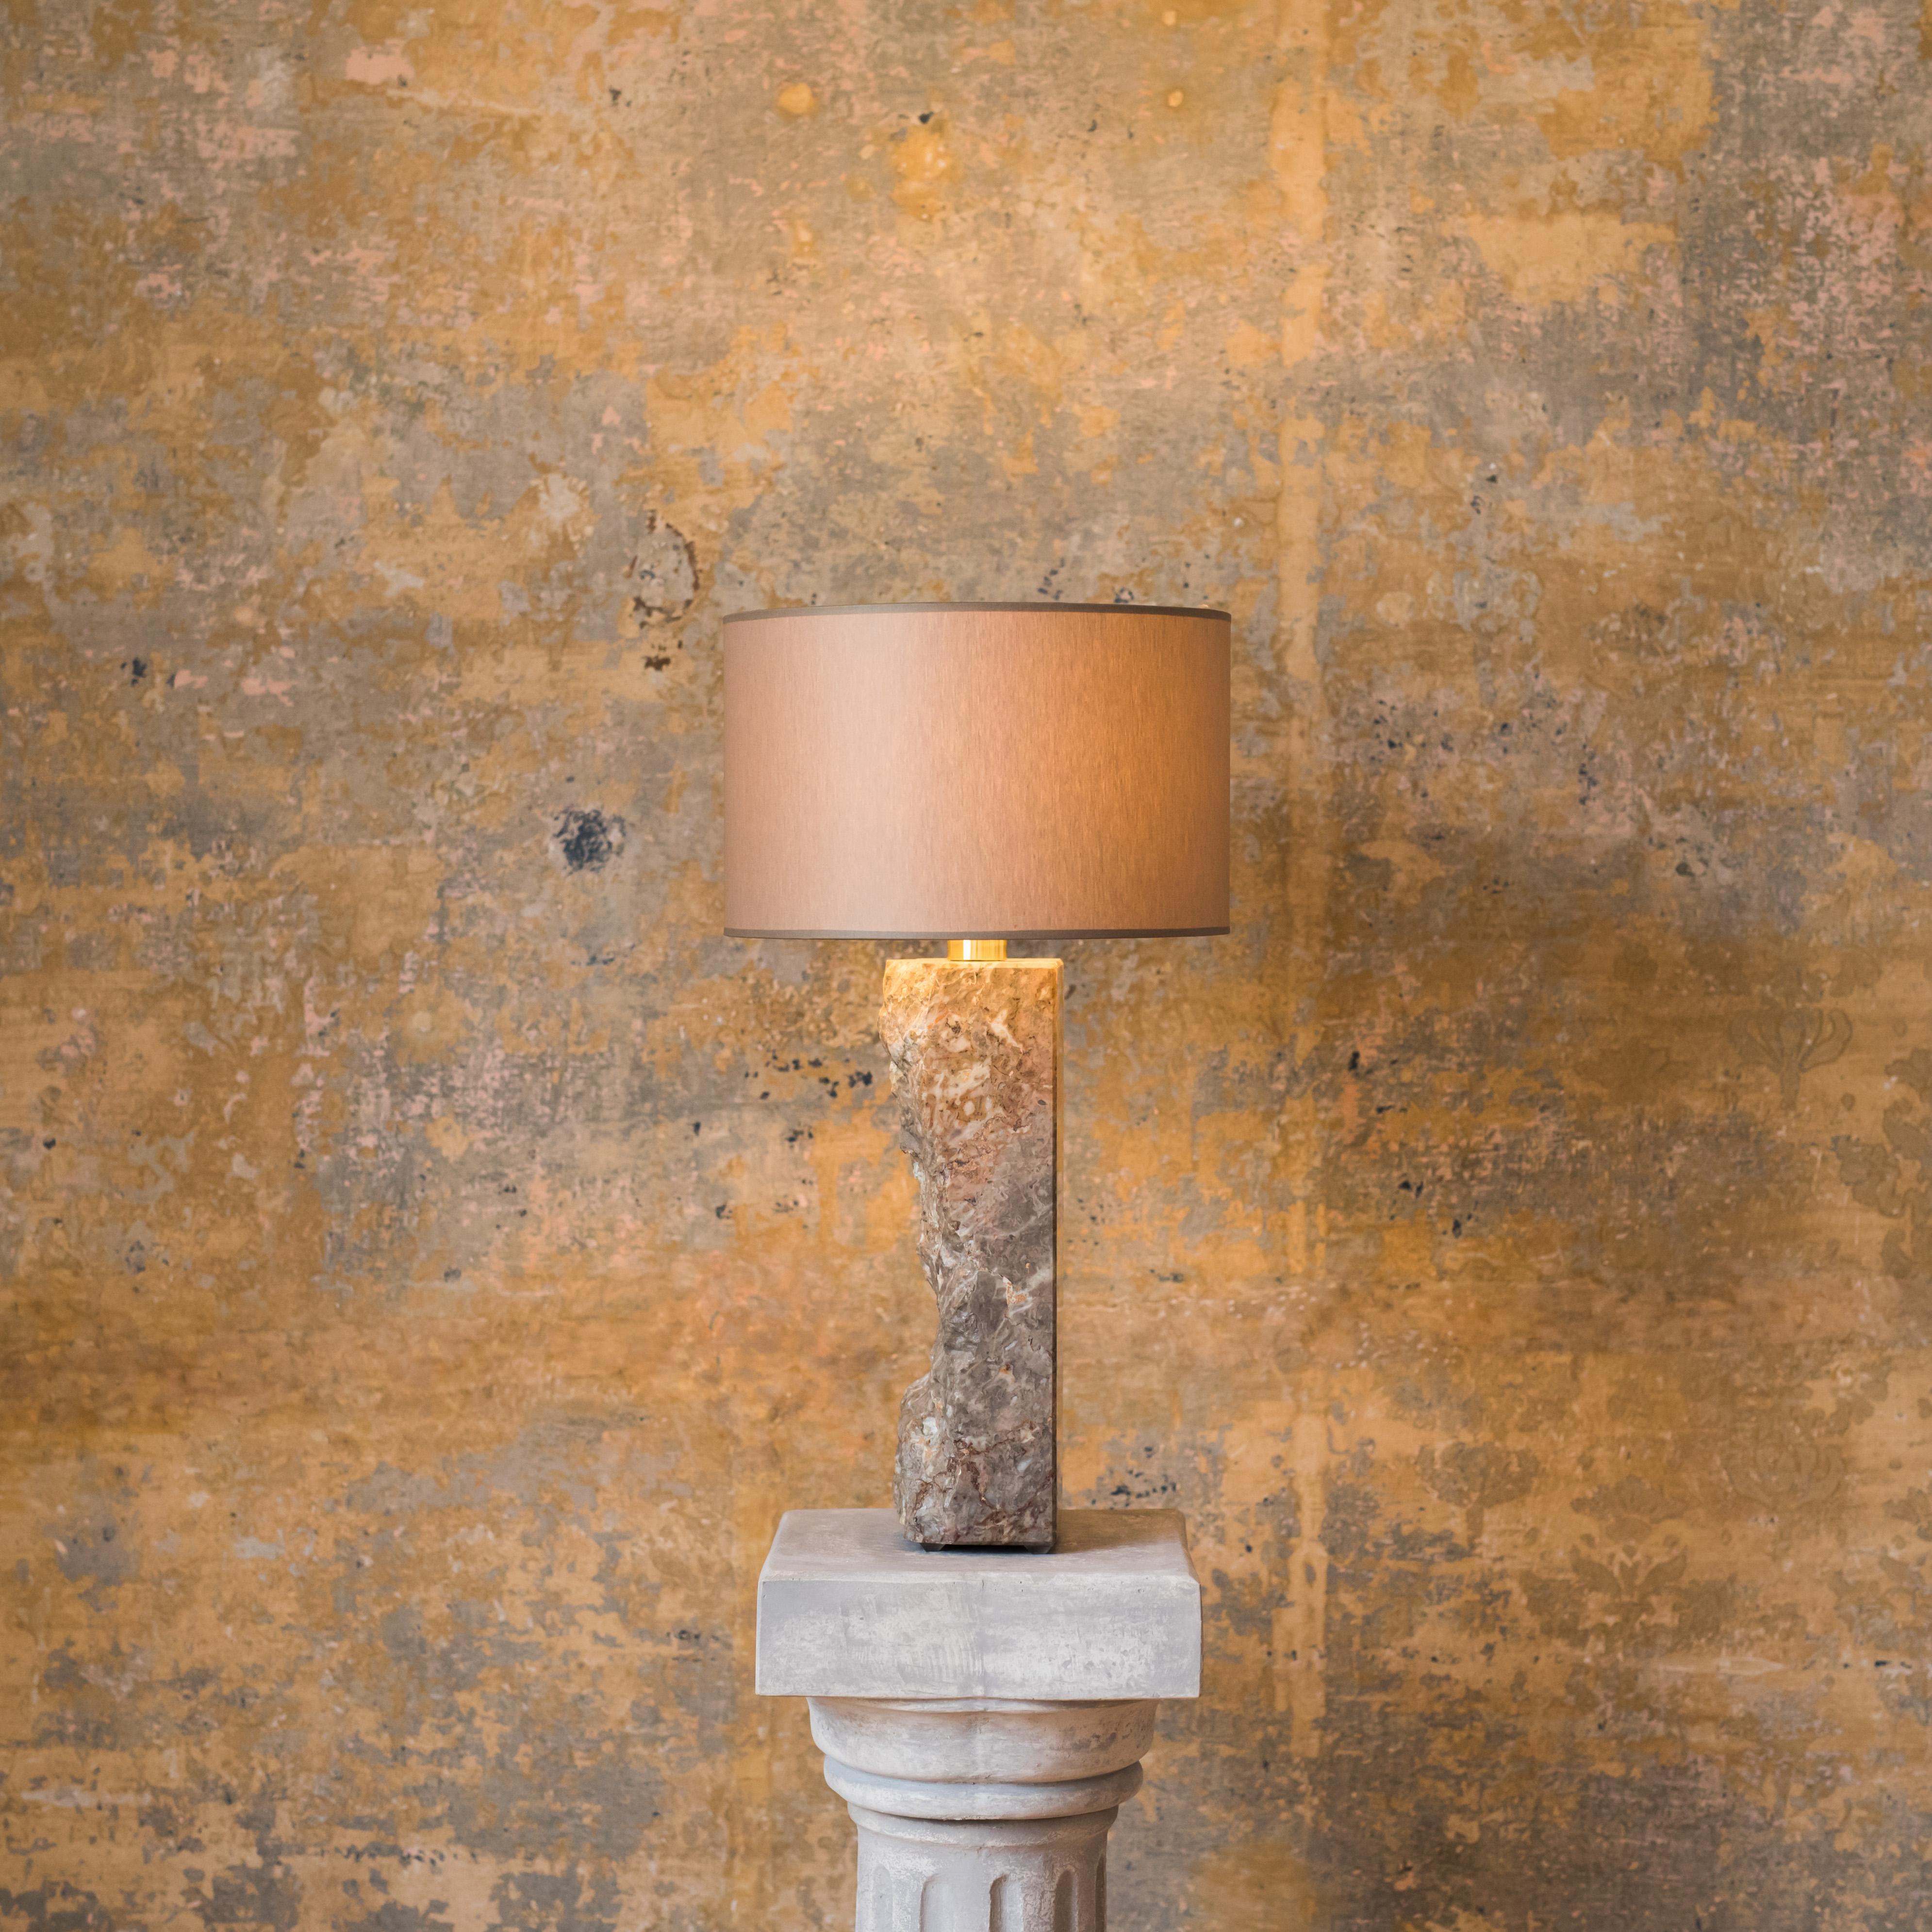 Marble sculpted table lamp by Brajak Vitberg
POMPEII 1.1.
Lesno brdo, polished brass
Dimensions: 62 x 35 x 35 cm
white or black cotton lampshade, cotton wiring

Bijelic and Brajak are two architects from Ljubljana, Slovenia.
They are striving to